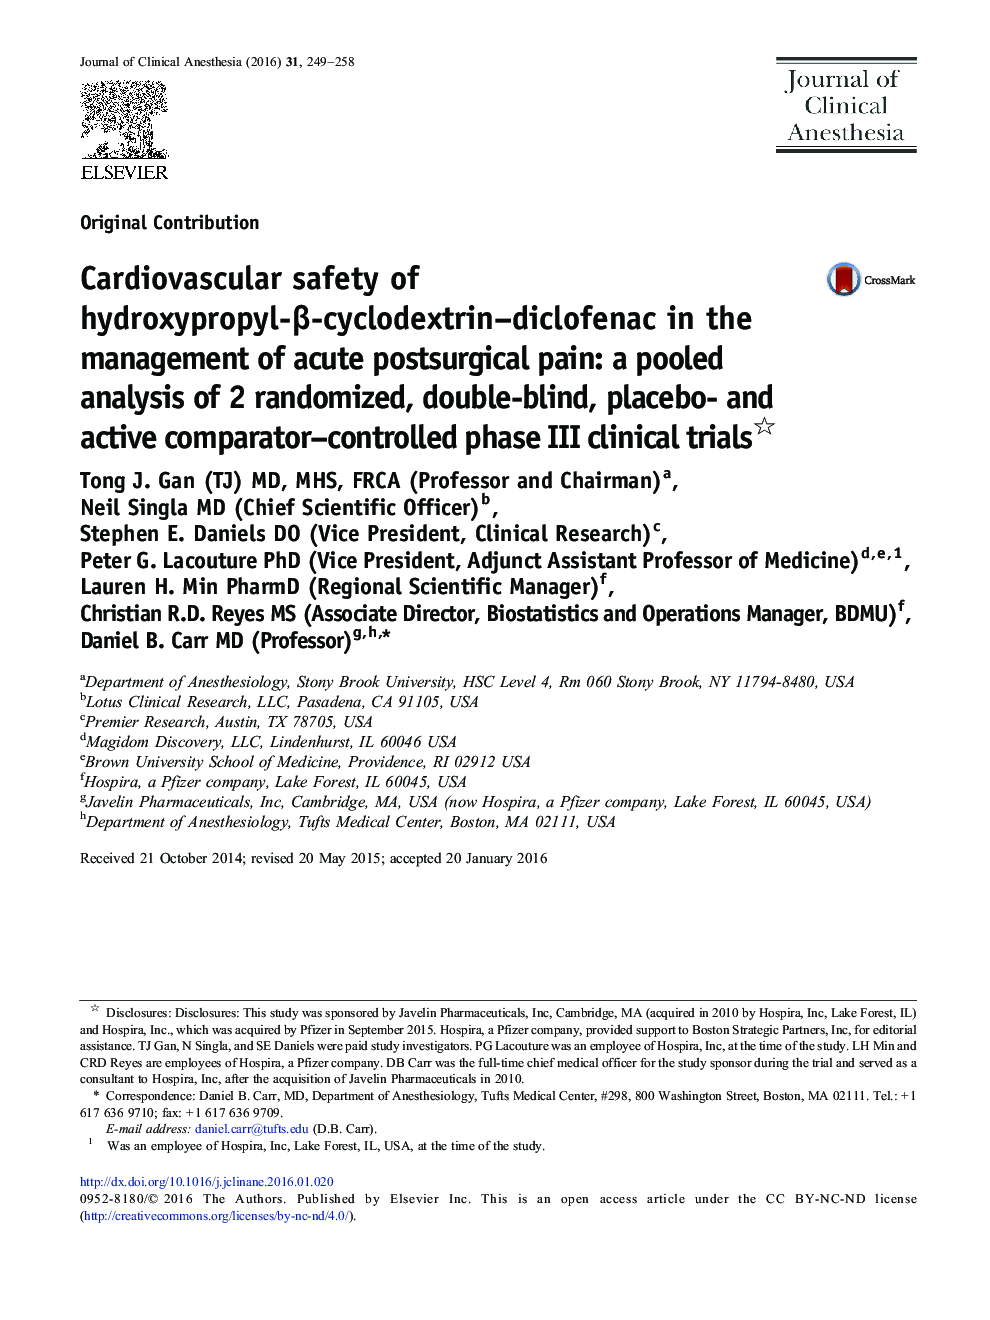 Cardiovascular safety of hydroxypropyl-Î²-cyclodextrin-diclofenac in the management of acute postsurgical pain: a pooled analysis of 2 randomized, double-blind, placebo- and active comparator-controlled phase III clinical trials